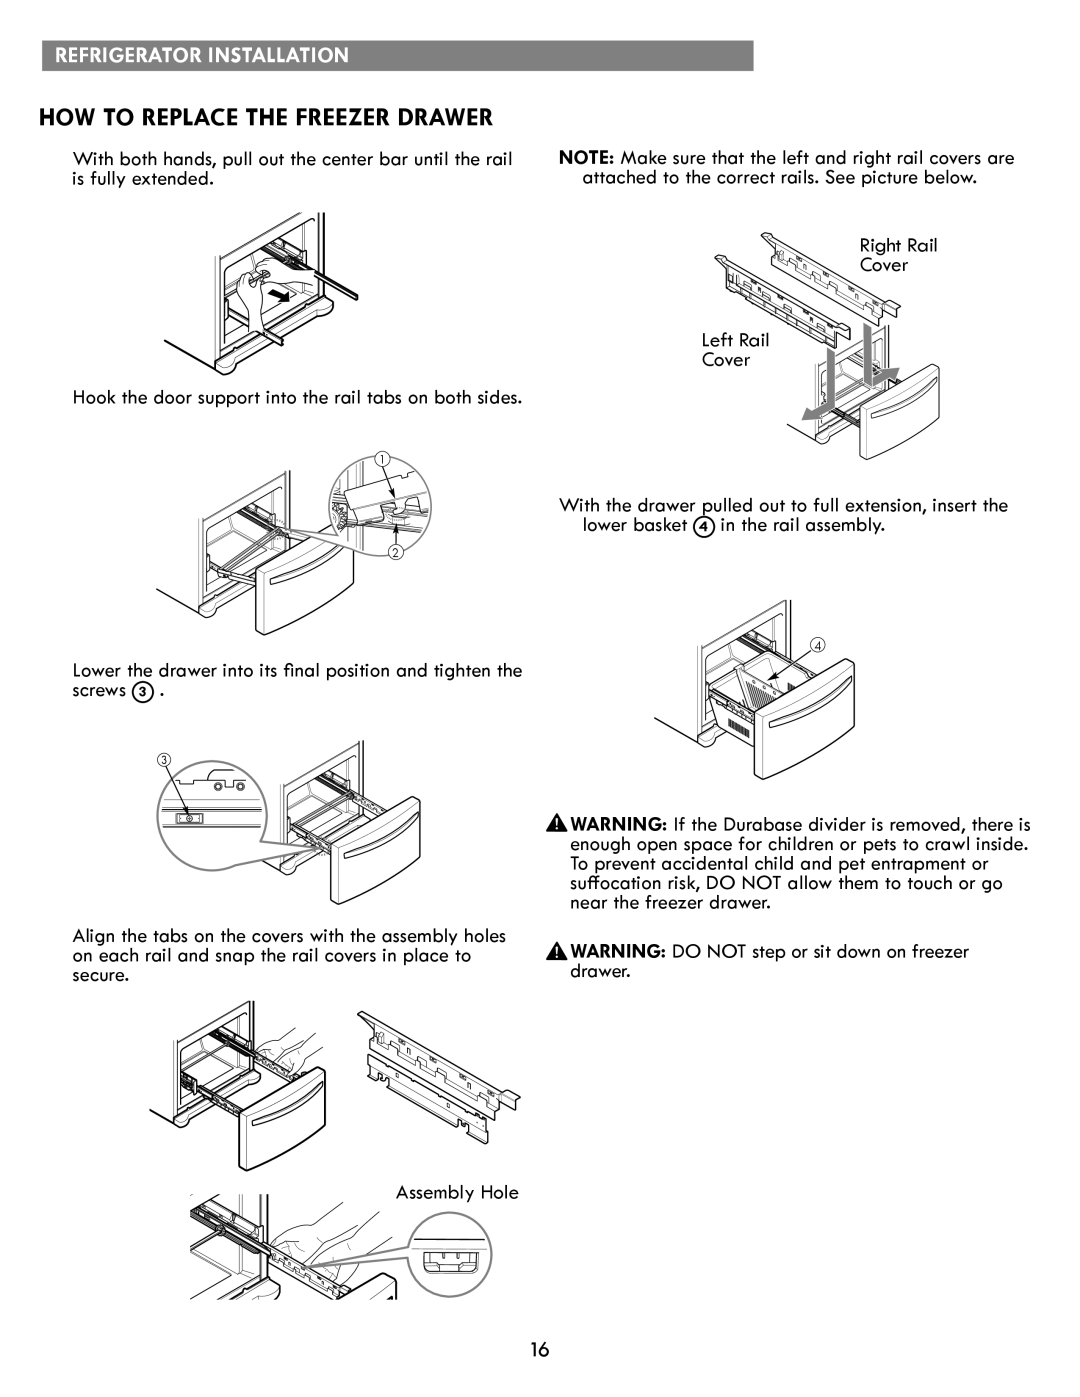 Kenmore kenmore manual How To Replace The Freezer Drawer, Refrigerator Installation 